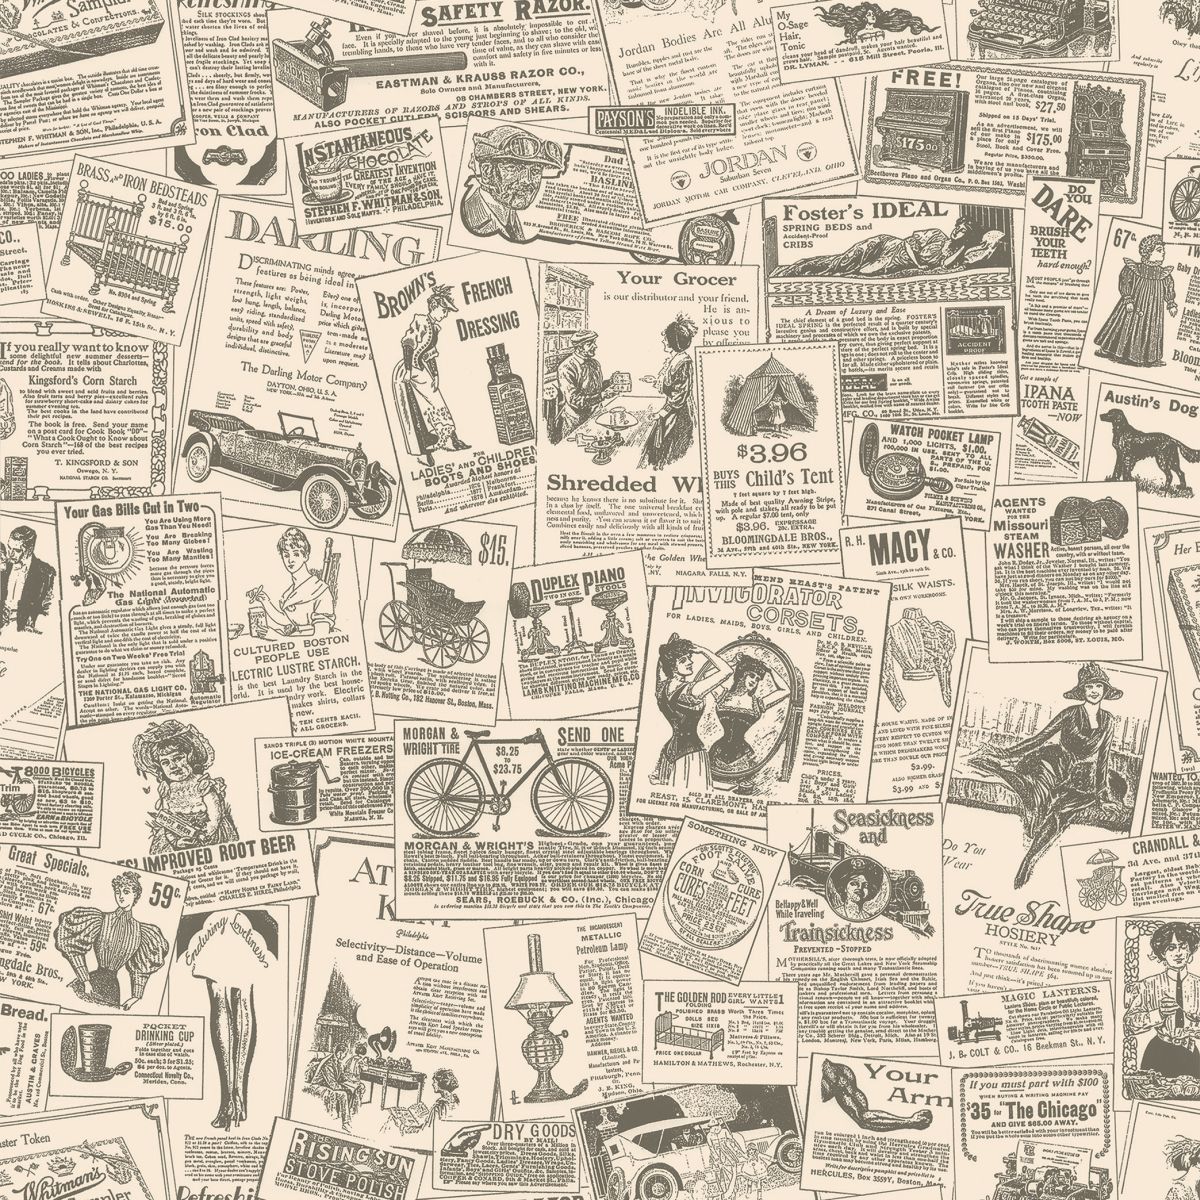 Decowunder Wallpaper Vinyl With Newspaper Ads Kc28503 To